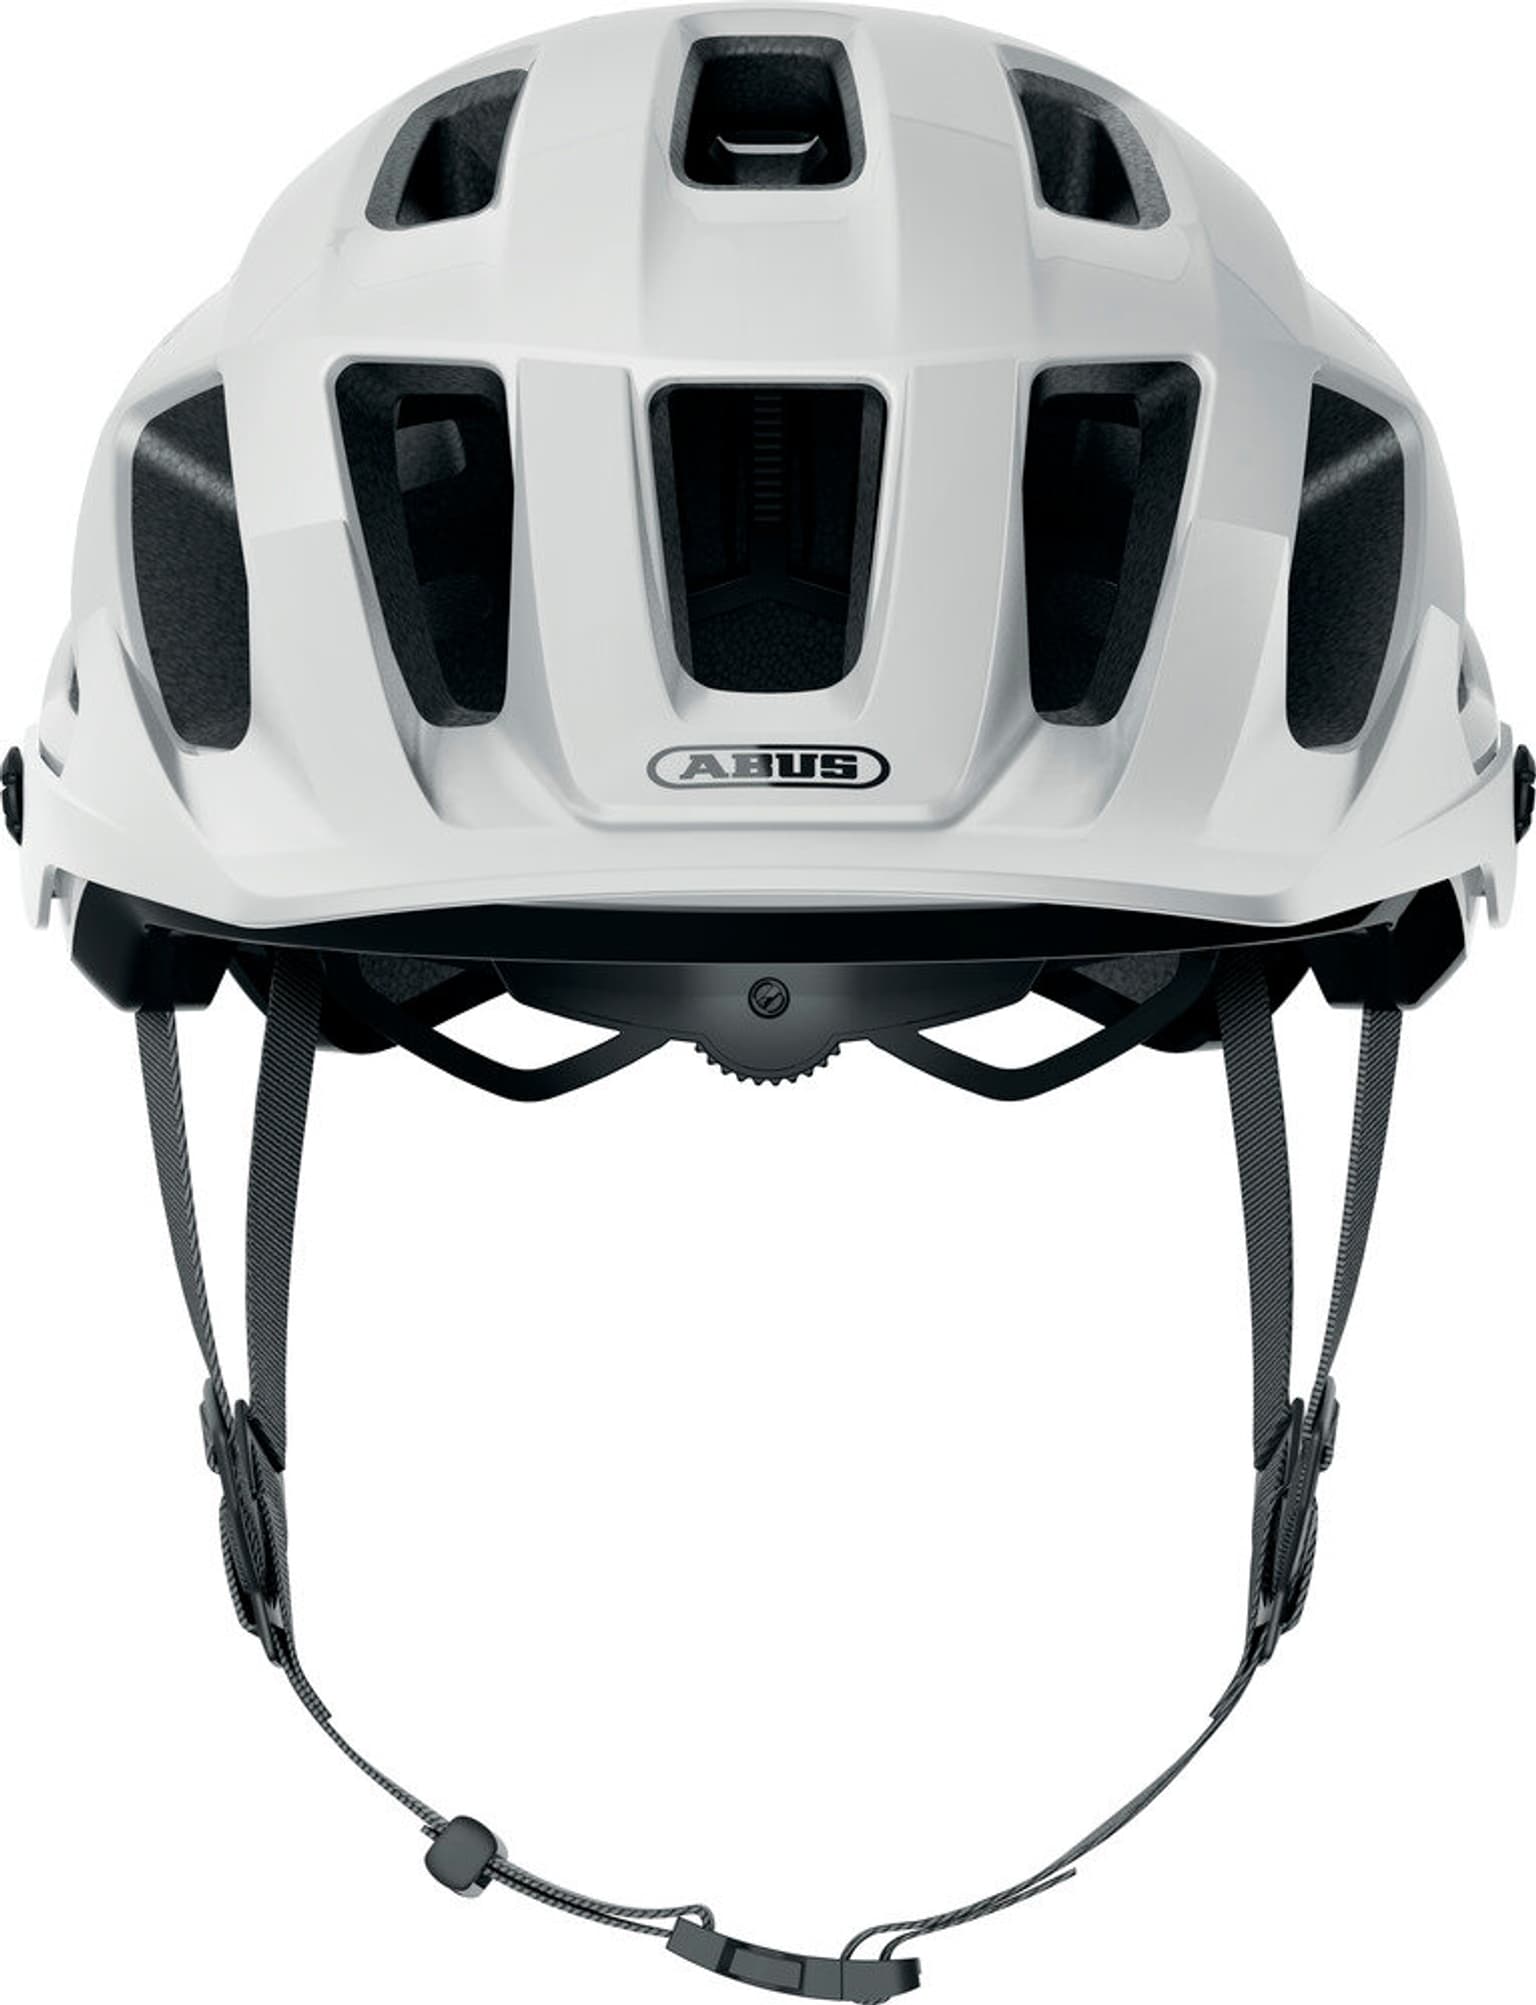 Abus Abus Moventor 2.0 QUIN Velohelm weiss 2